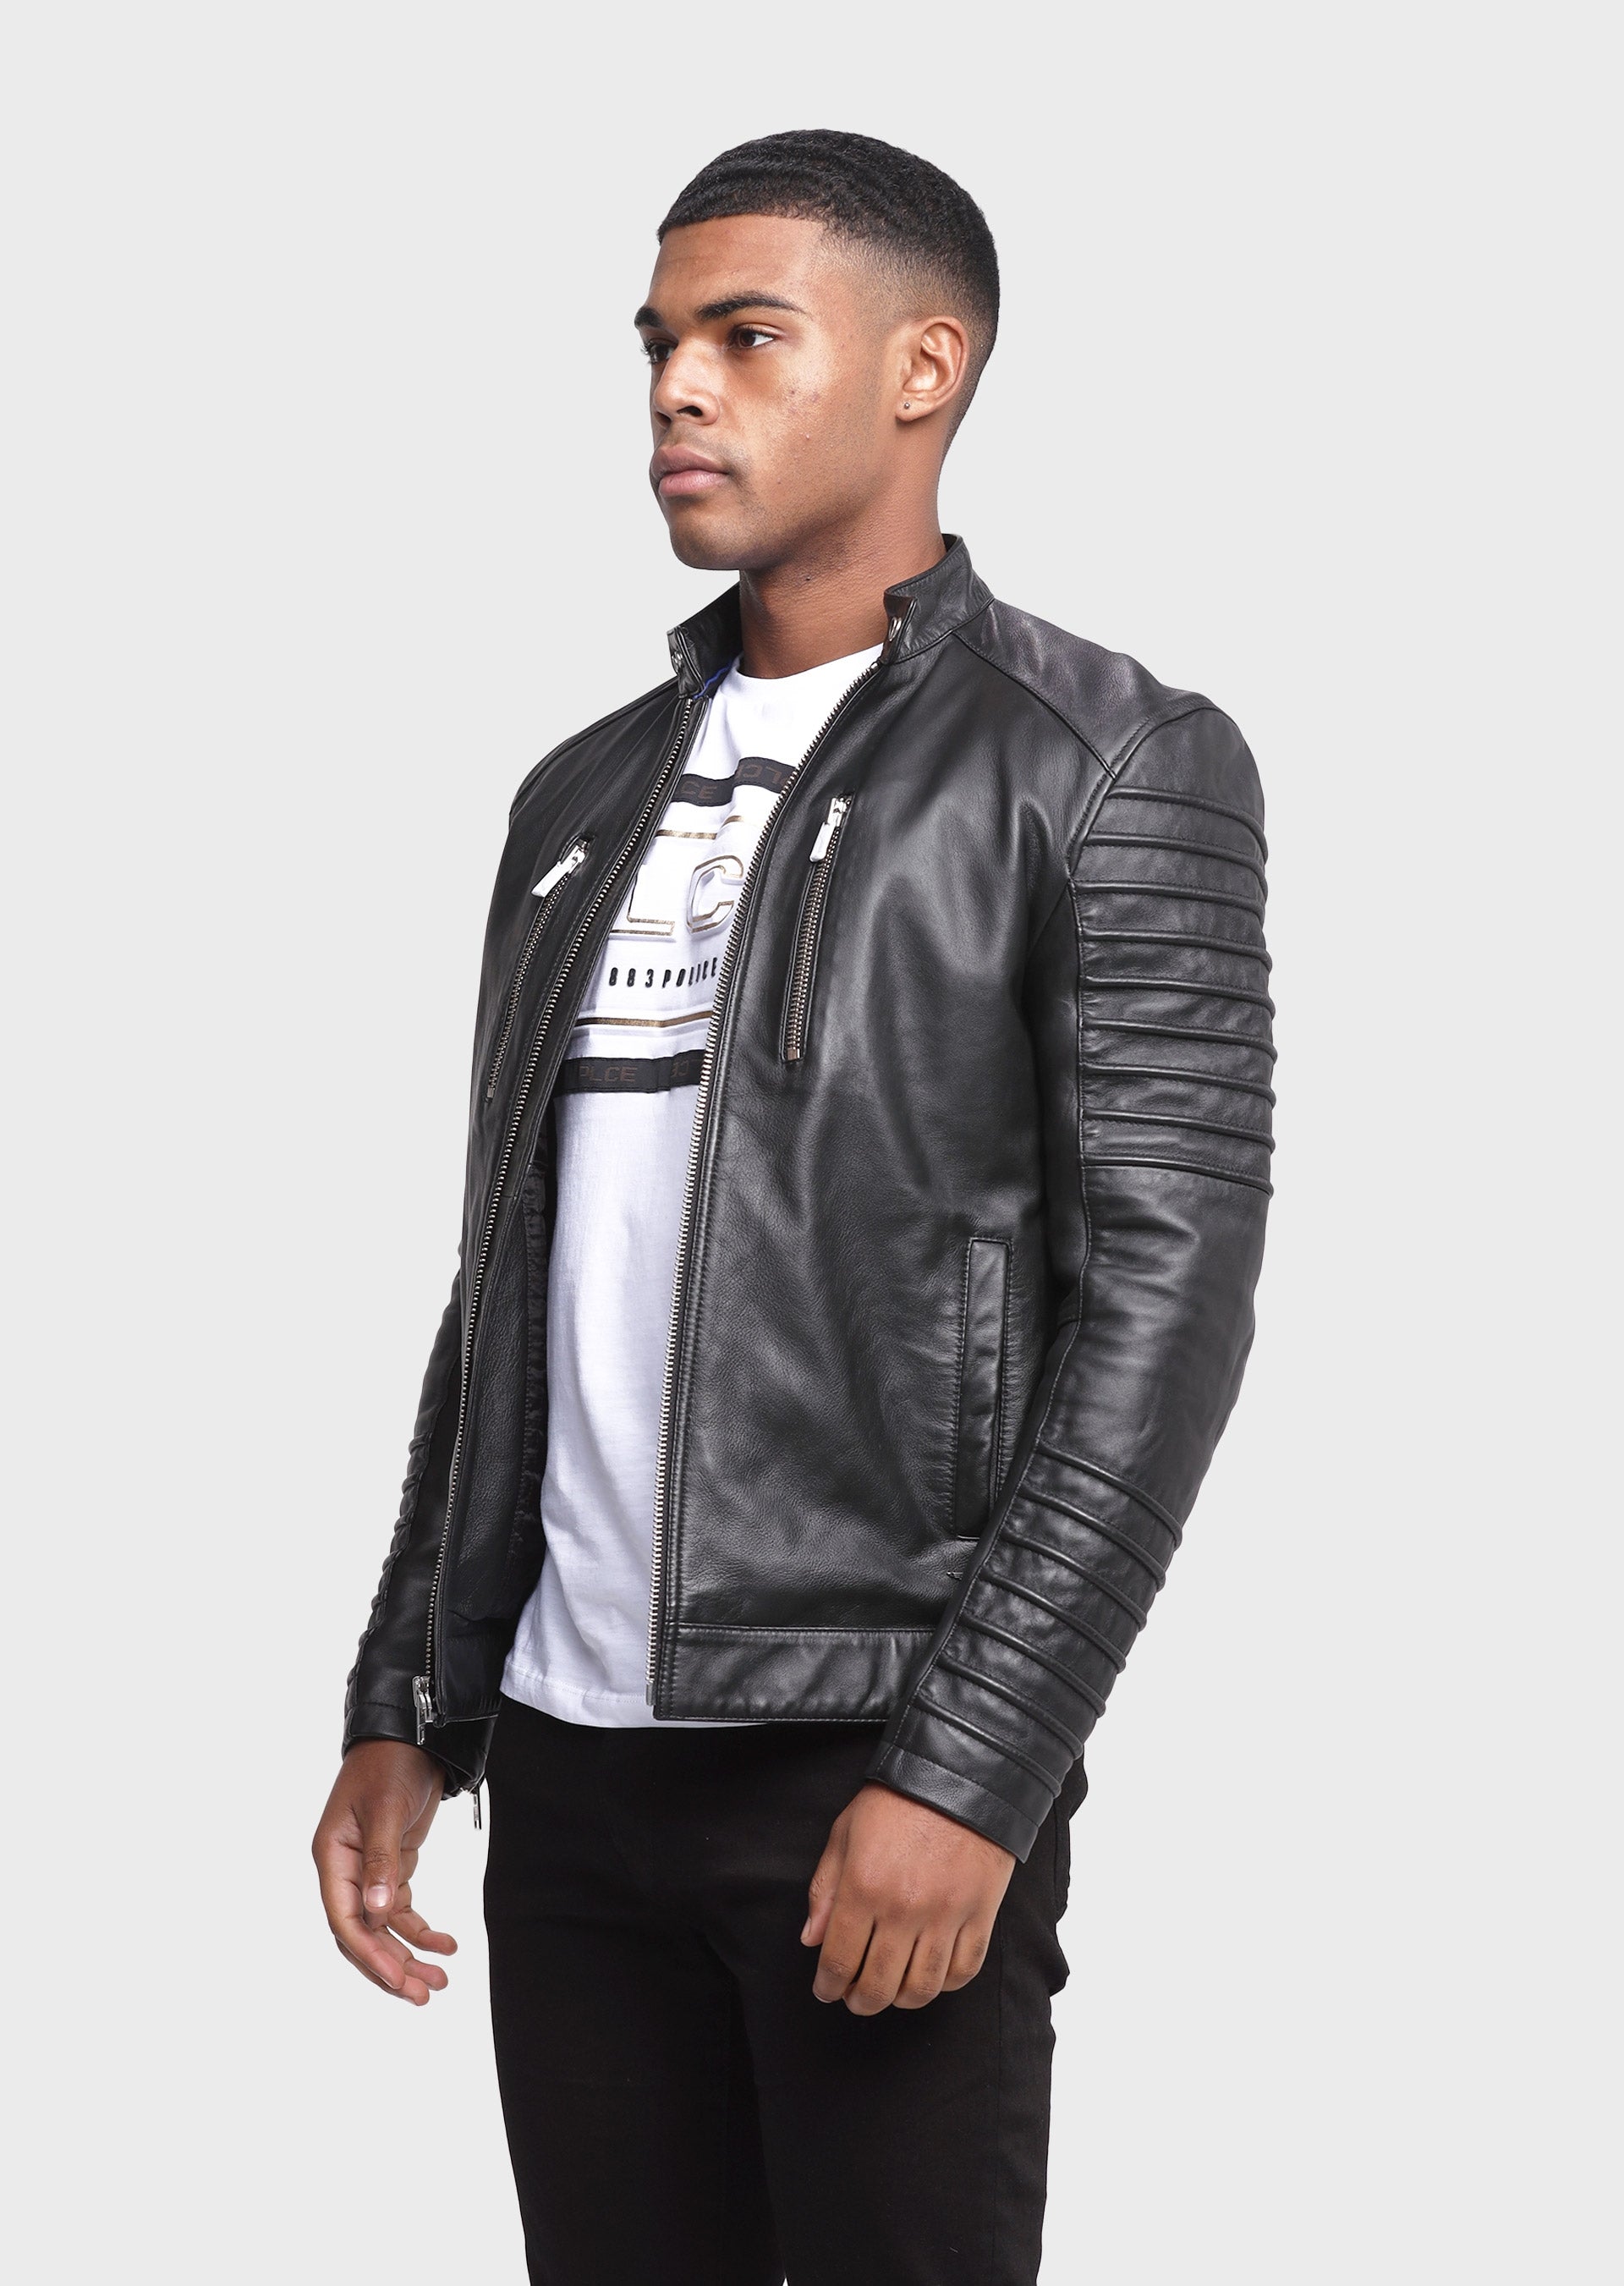 Police Palette Black Leather Sheep Tumbled Mens Jackets | 883 Police